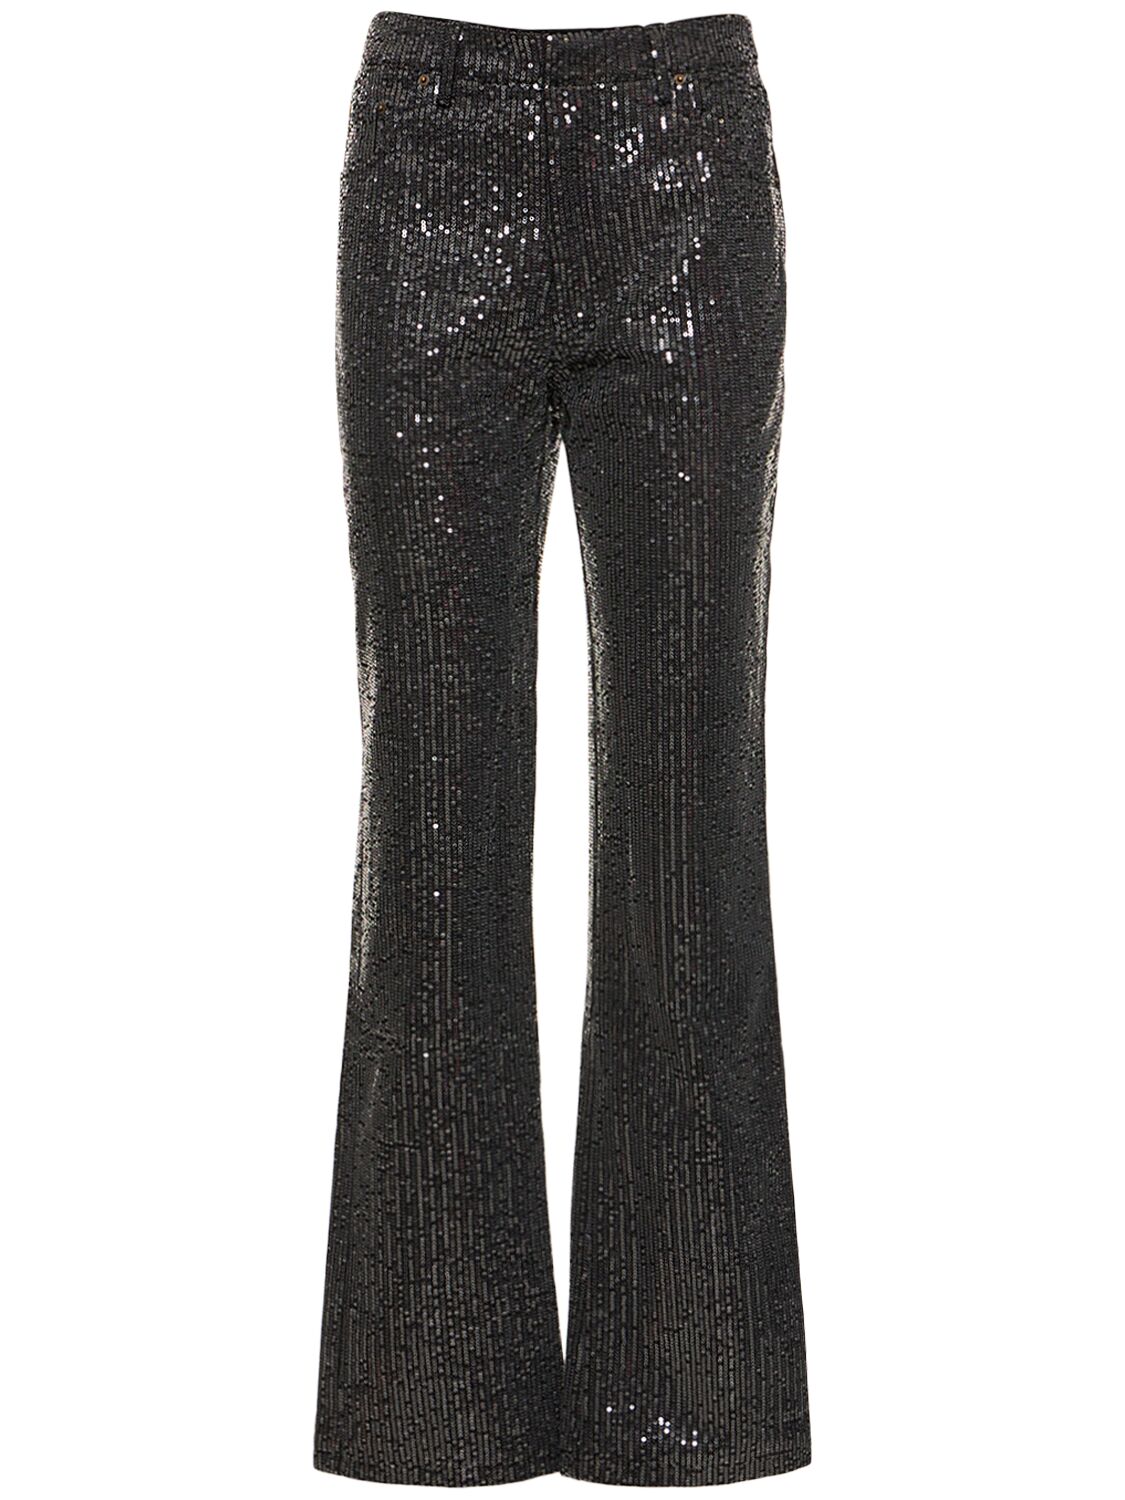 Image of Sequined Twill Pants